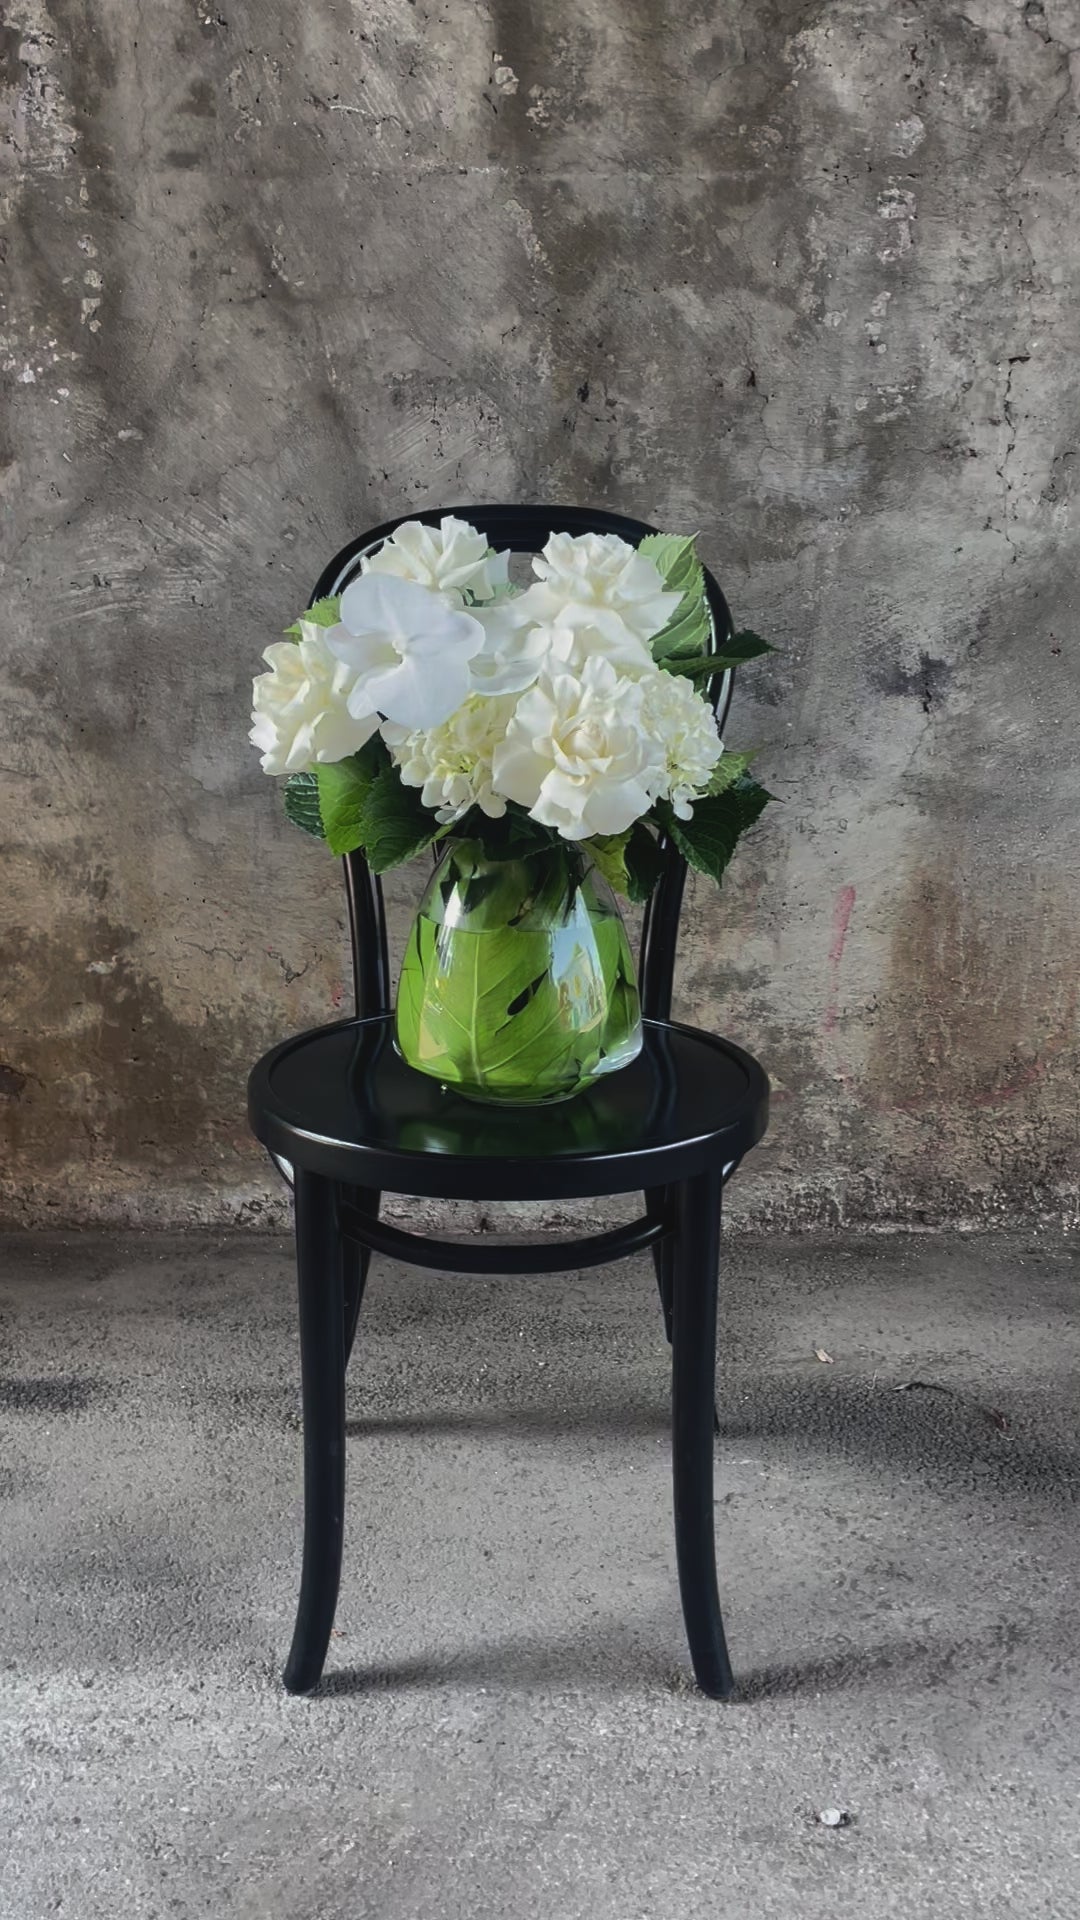 Video of White and green flowers displayed in a glass tapered vase, sitting on a black bentwood chair with a concrete wall background.